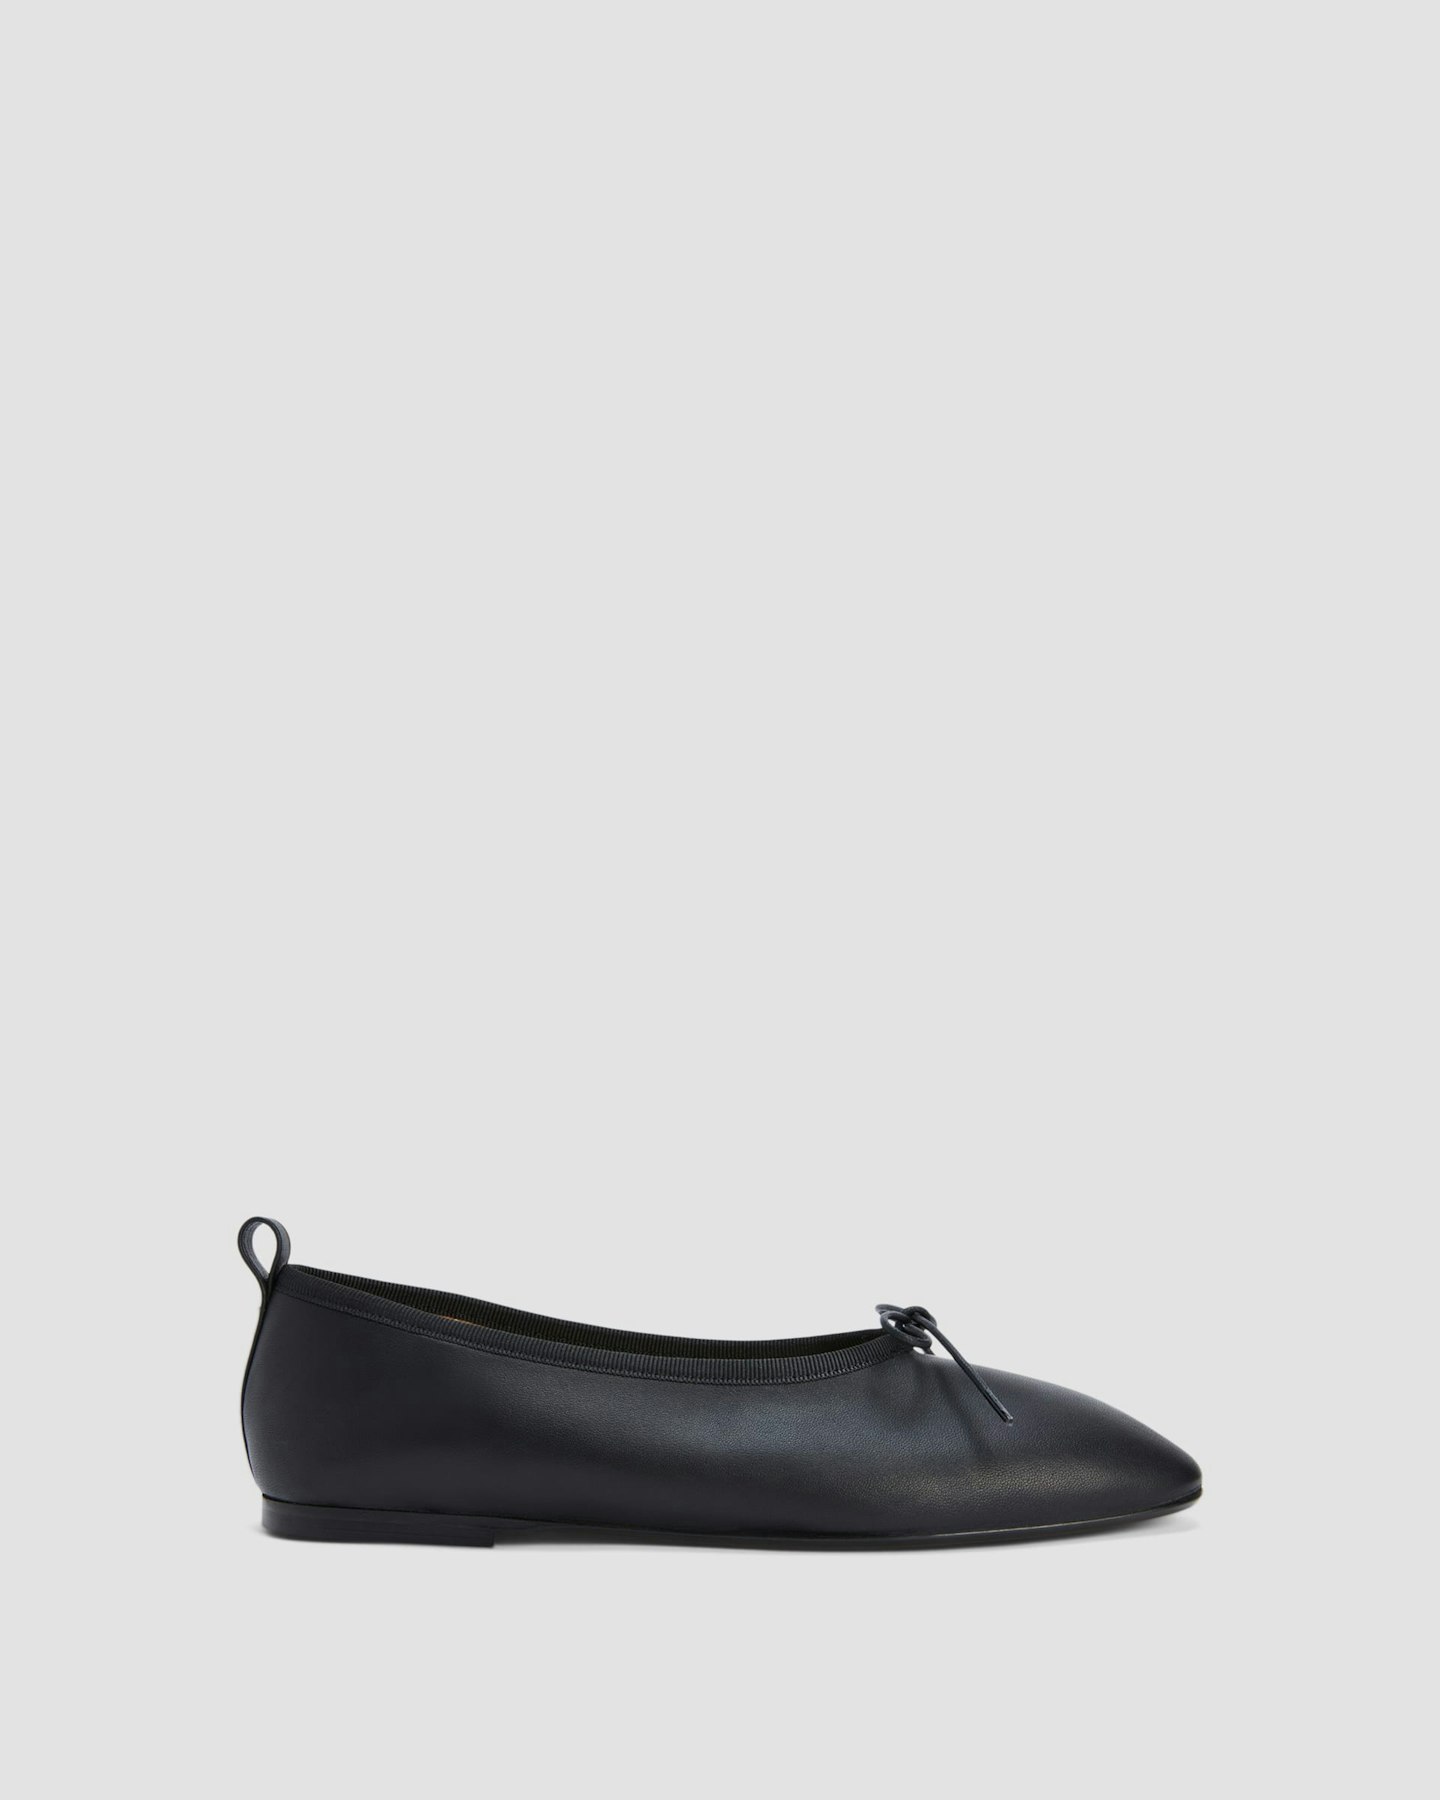 Everlane, The Italian Leather Day Ballet Flat